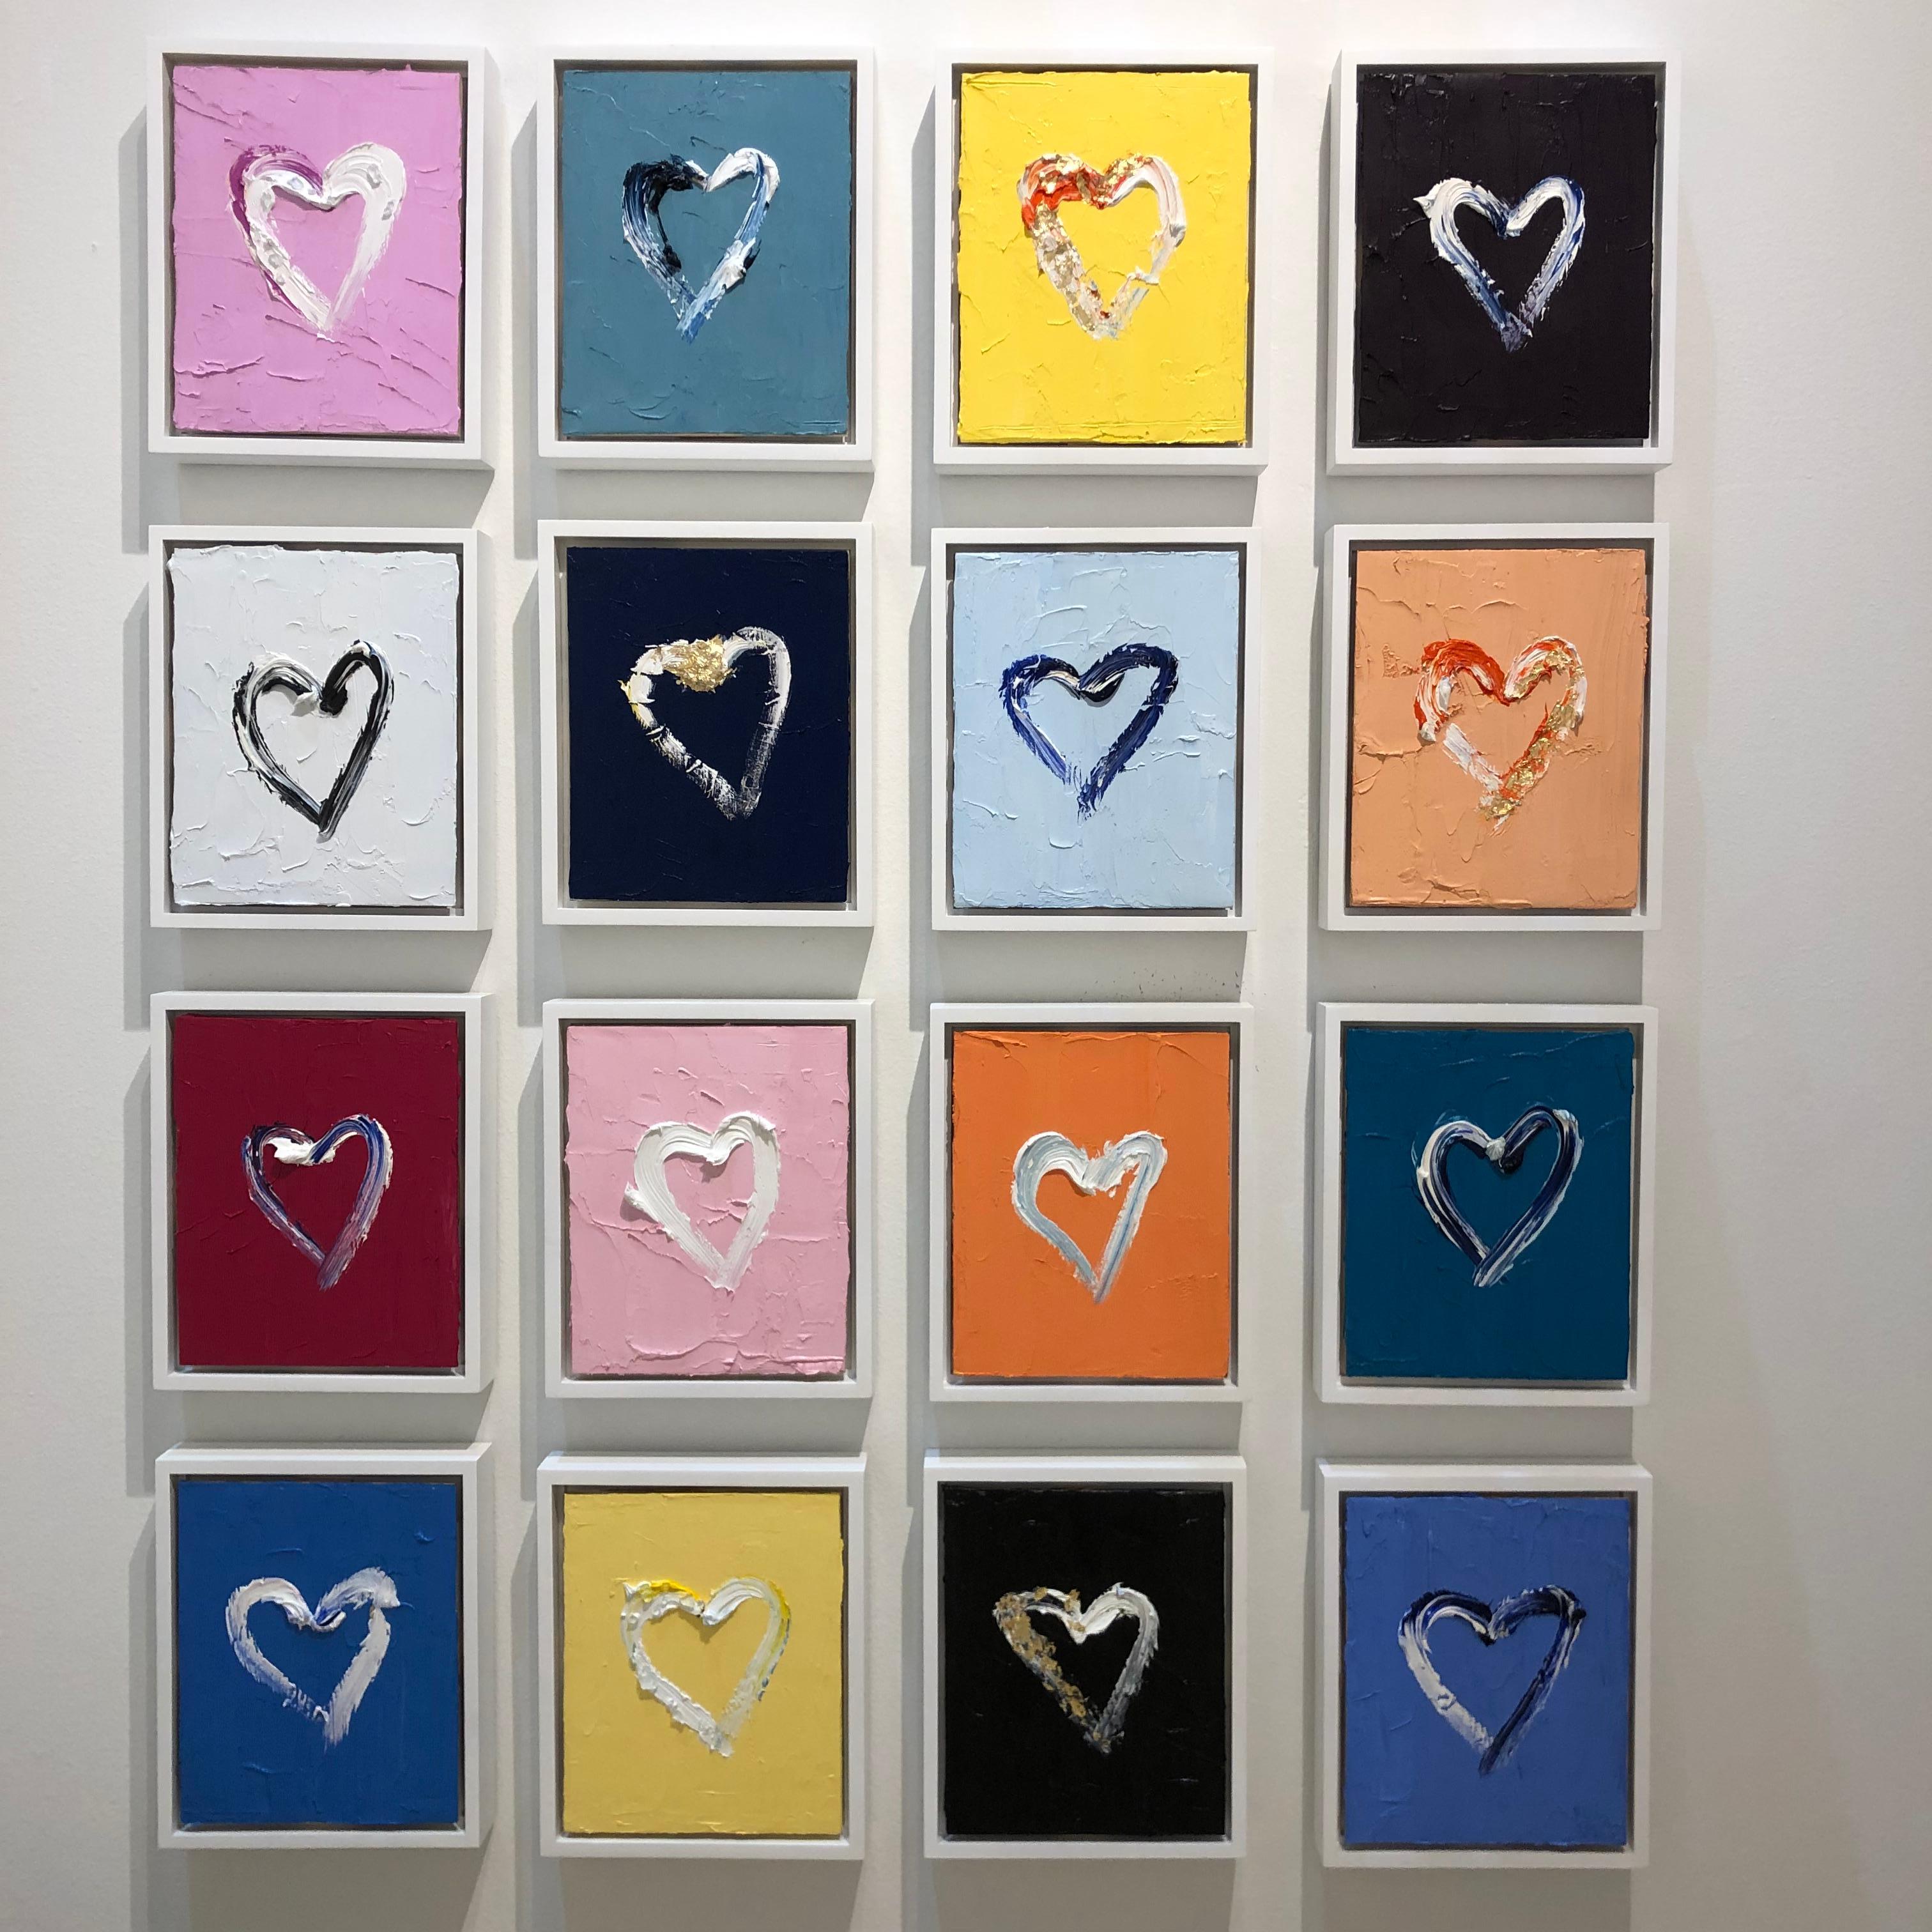 Motivated by bold color and fast brush work, we are moved by the simplicity and thick textured oil paints in these works. Shaoul’s “My Heart Collection” is a vibrant and energetic display of love encapsulated in these miniature hearts, leaving us